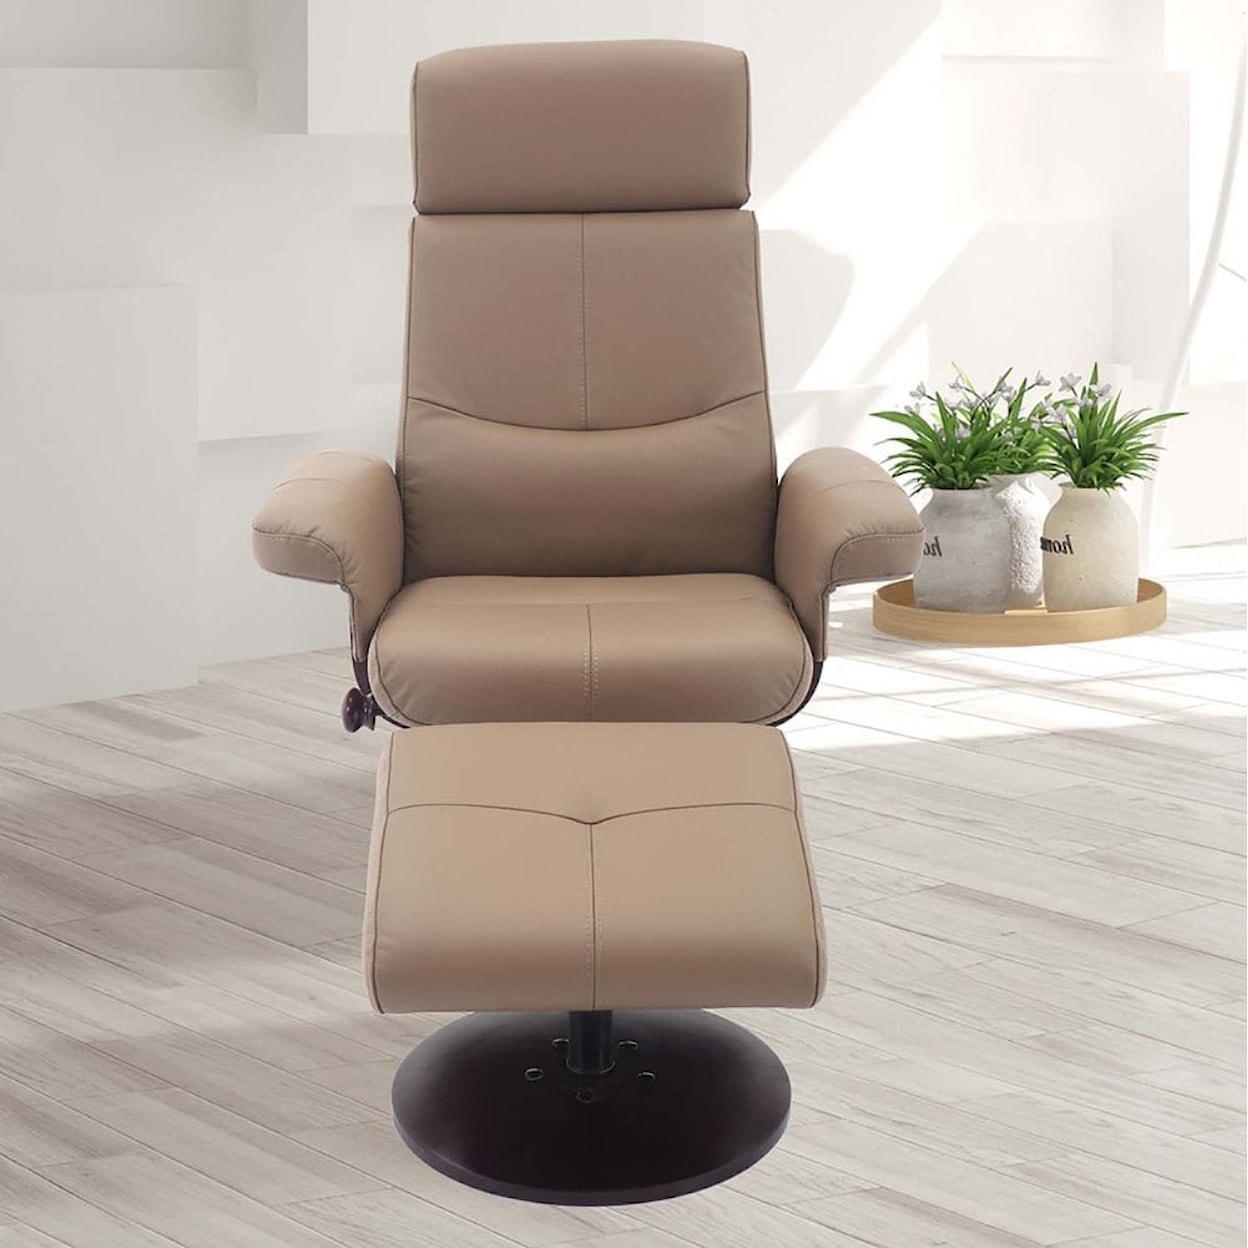 Carolina Chairs M165 Roma Recliner with Ottoman